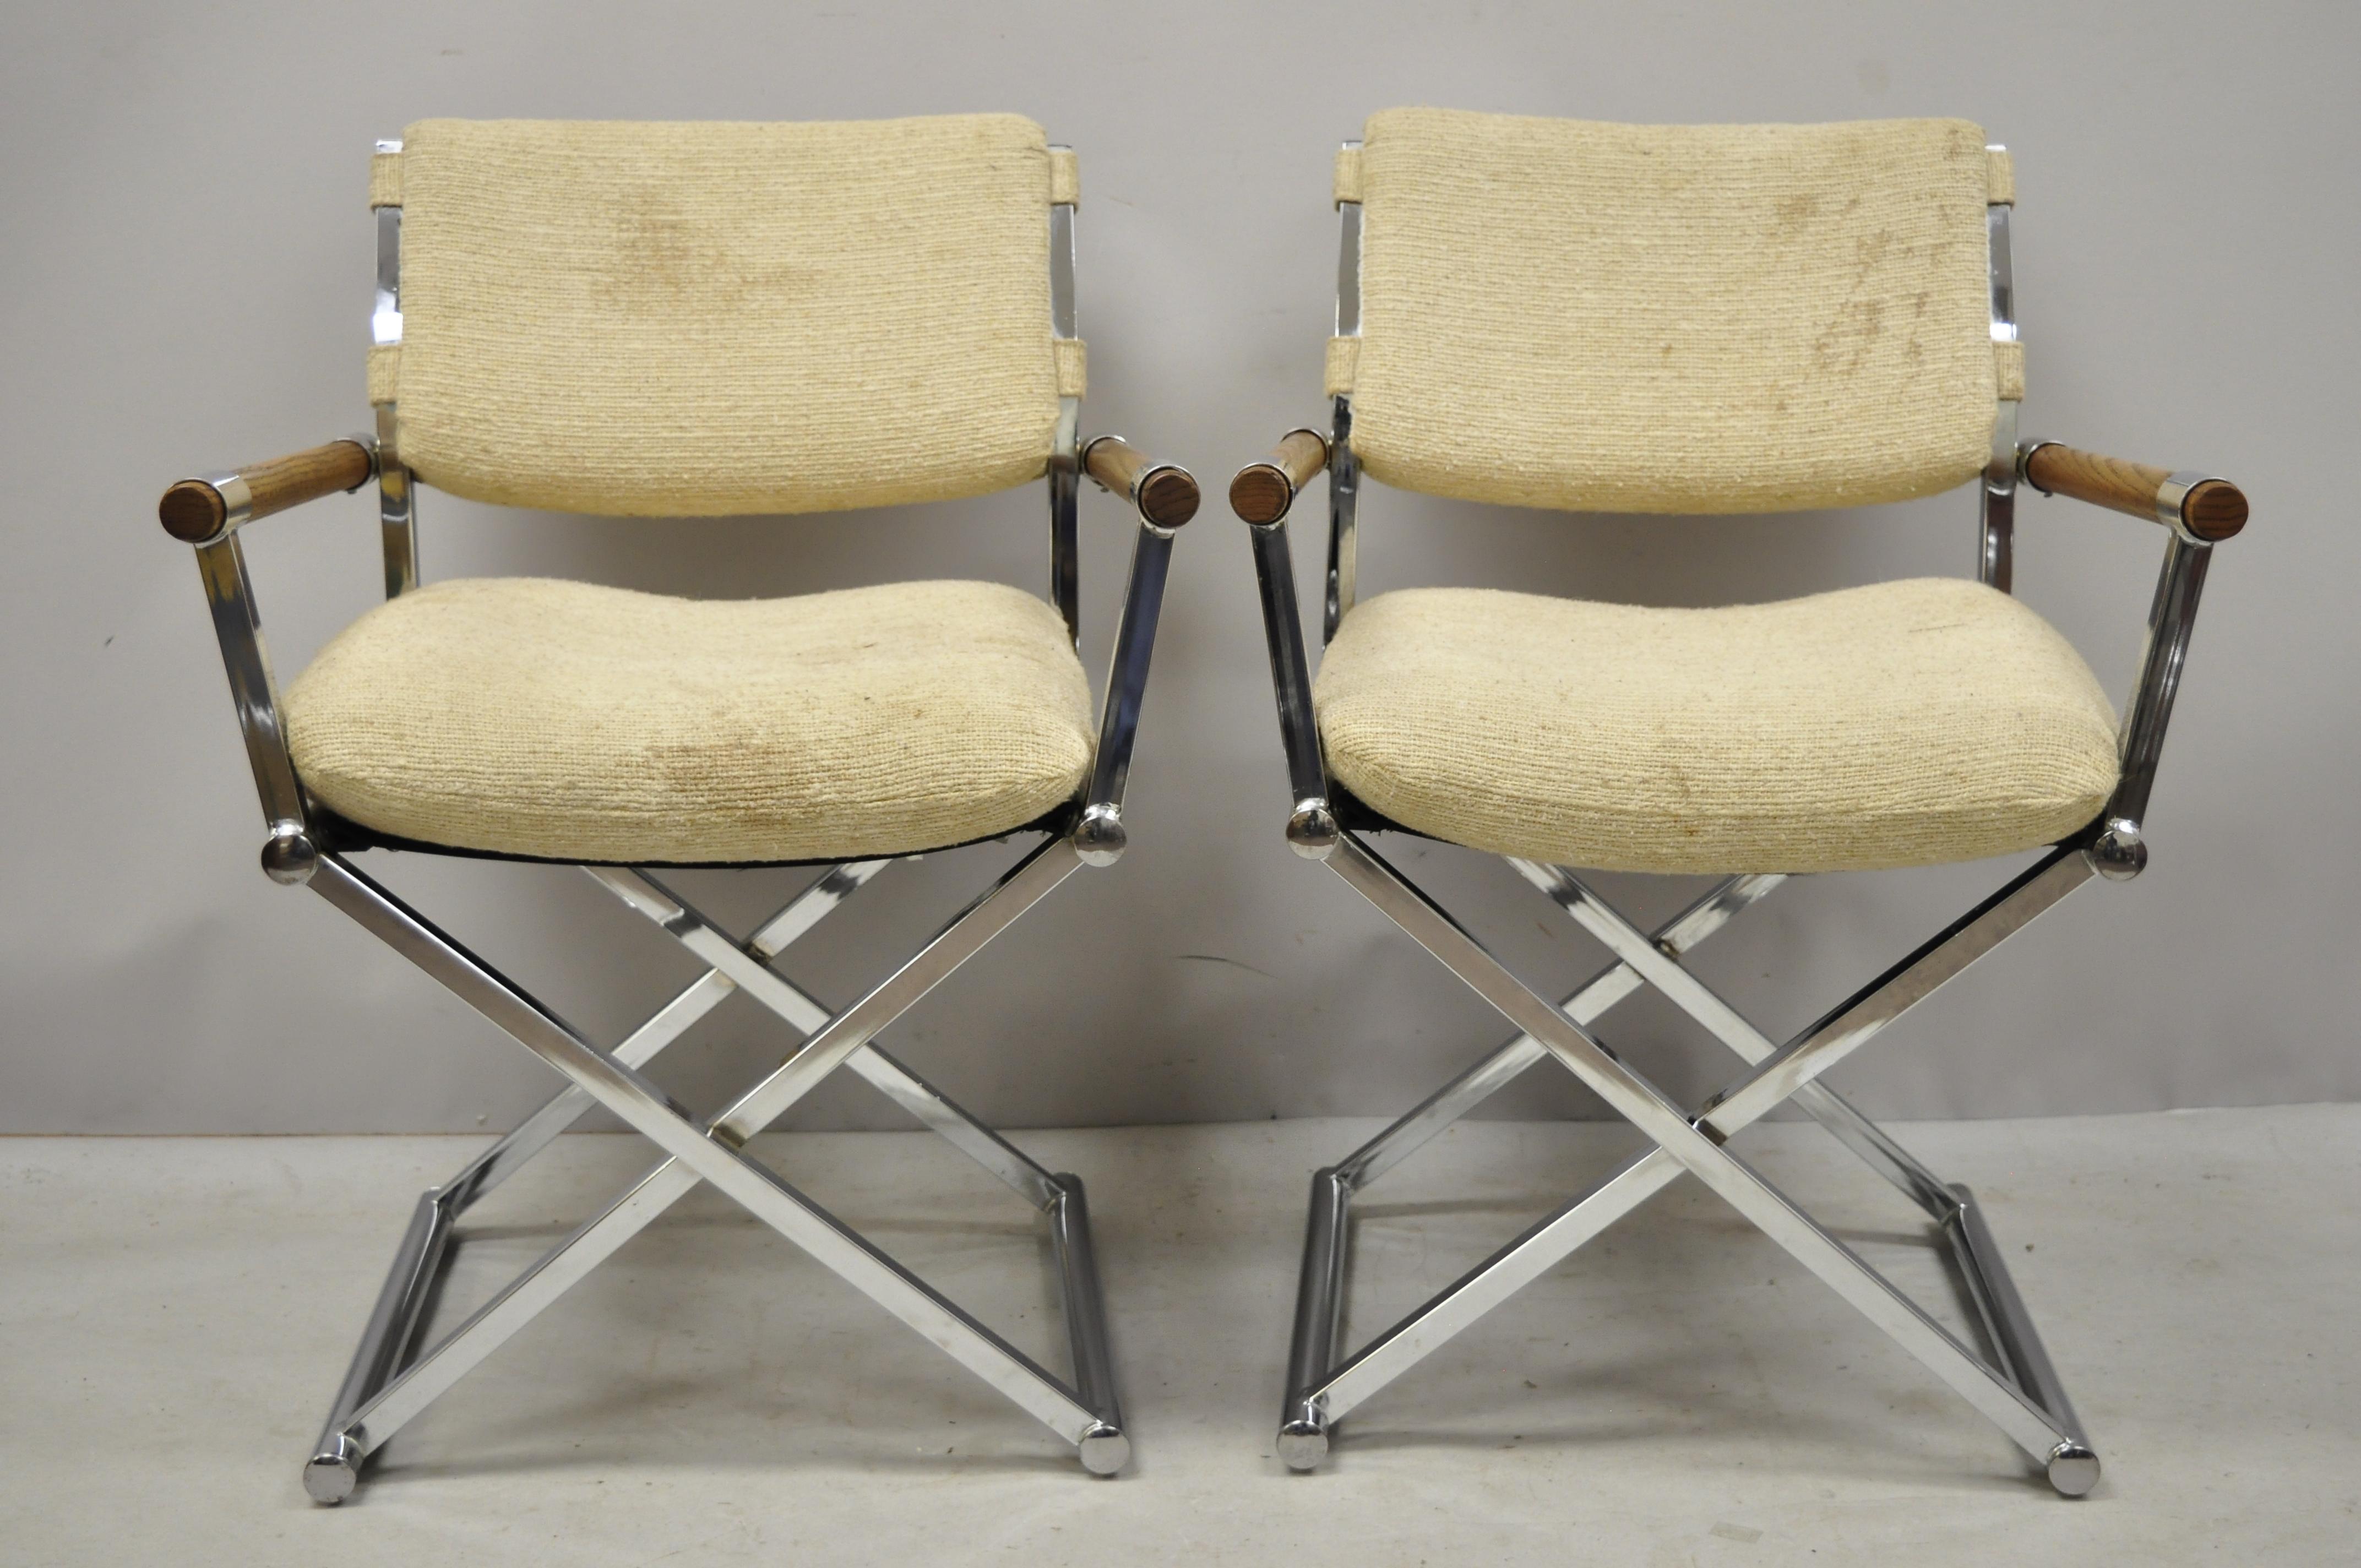 Pair of Mid-Century Modern chrome X-frame Directors armchairs Cal Style Furn. (B). Item features chrome metal frames, solid wood arms, X-frame base, original label, clean modernist lines, sleek sculptural form, circa late 20th century. Measurements: